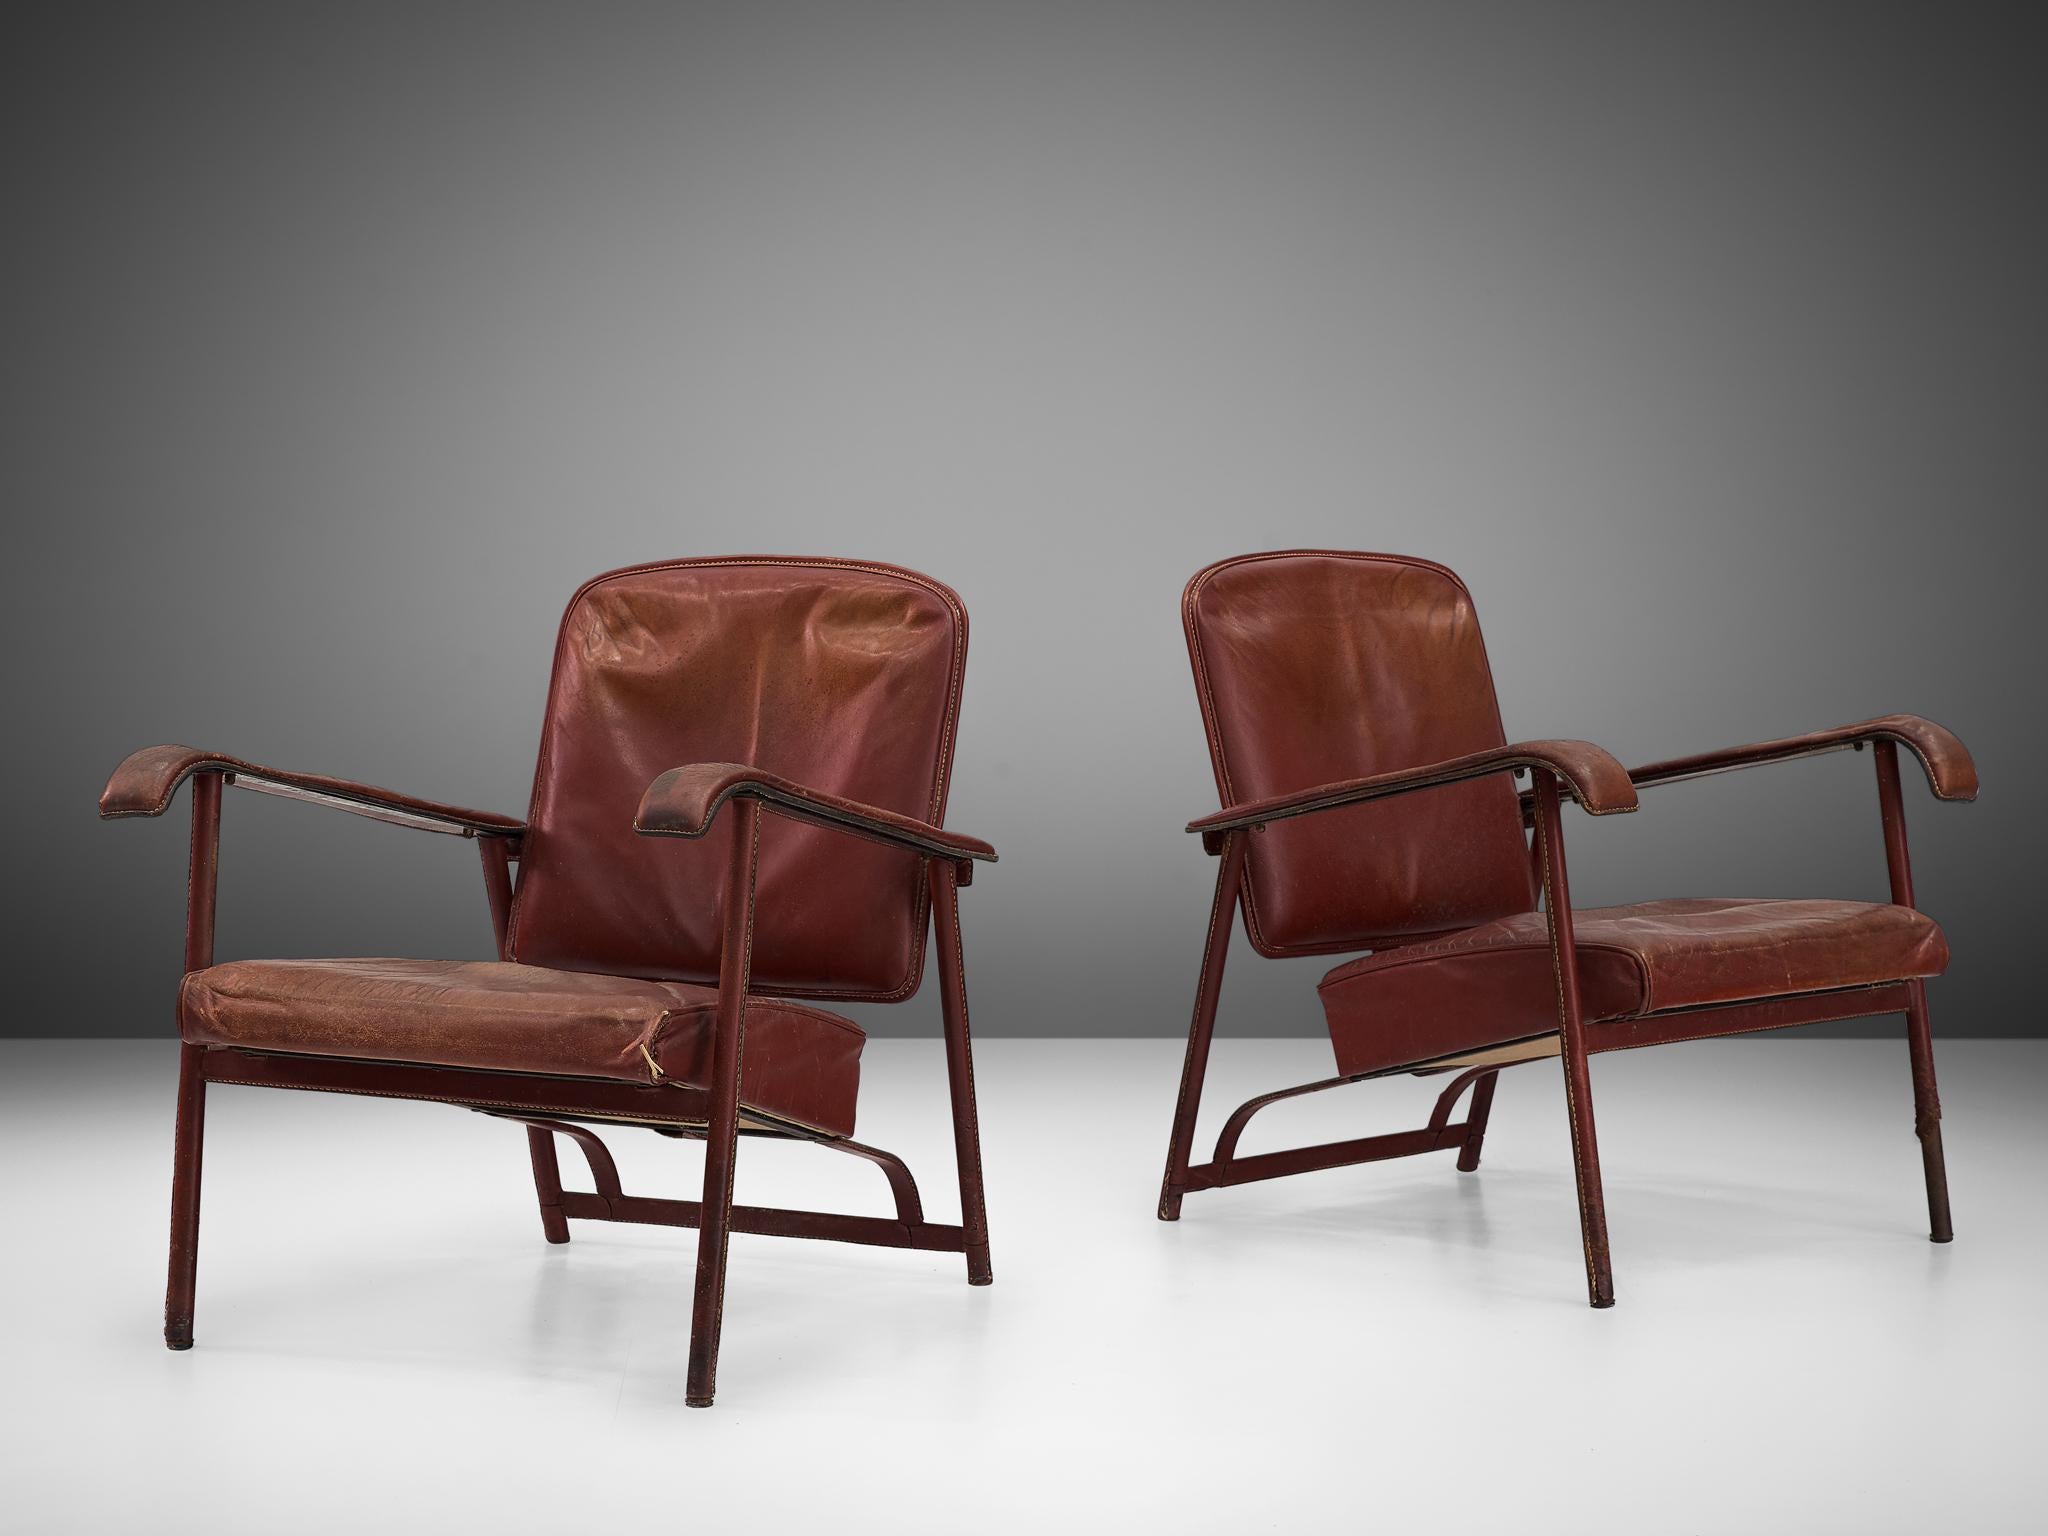 Jacques Adnet, pair of lounger chairs to reupholster, leather and metal, France, late 1950s.

Pair of armchairs by the French designer Jacques Adnet, featuring a tubular steel frame, clad with patinated leather. The use of tubular steel started in